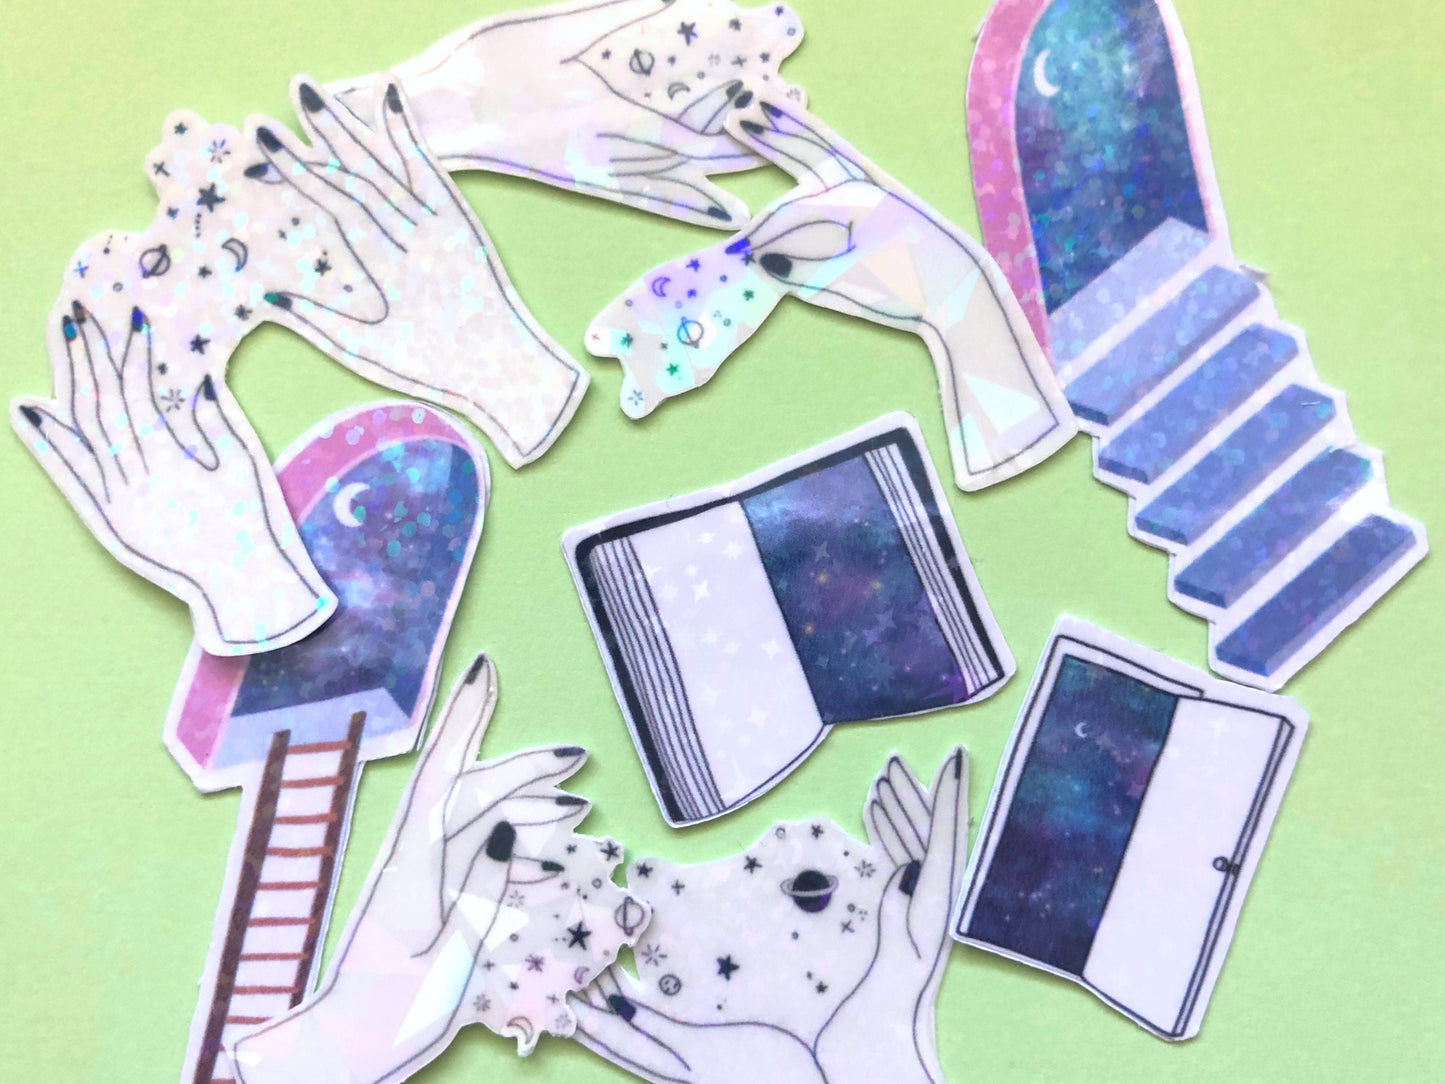 Holographic Galaxy Sticker Pack | Transparent Stickers